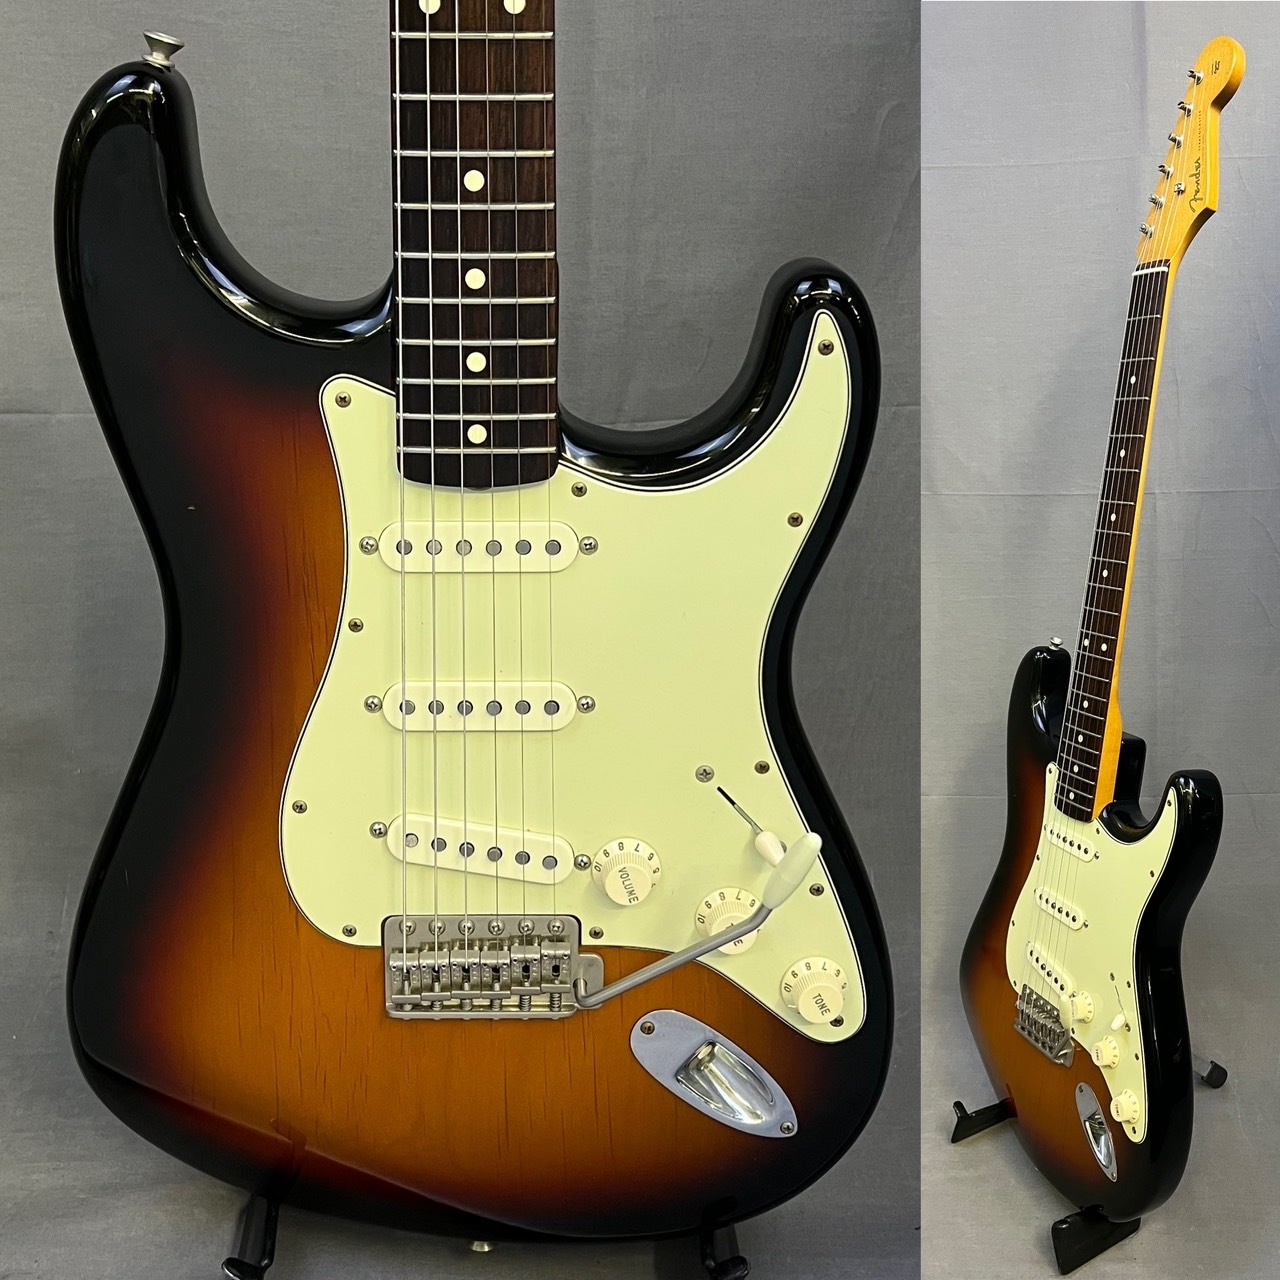 Fender Mexico Classic Series s Stratocaster 年製中古